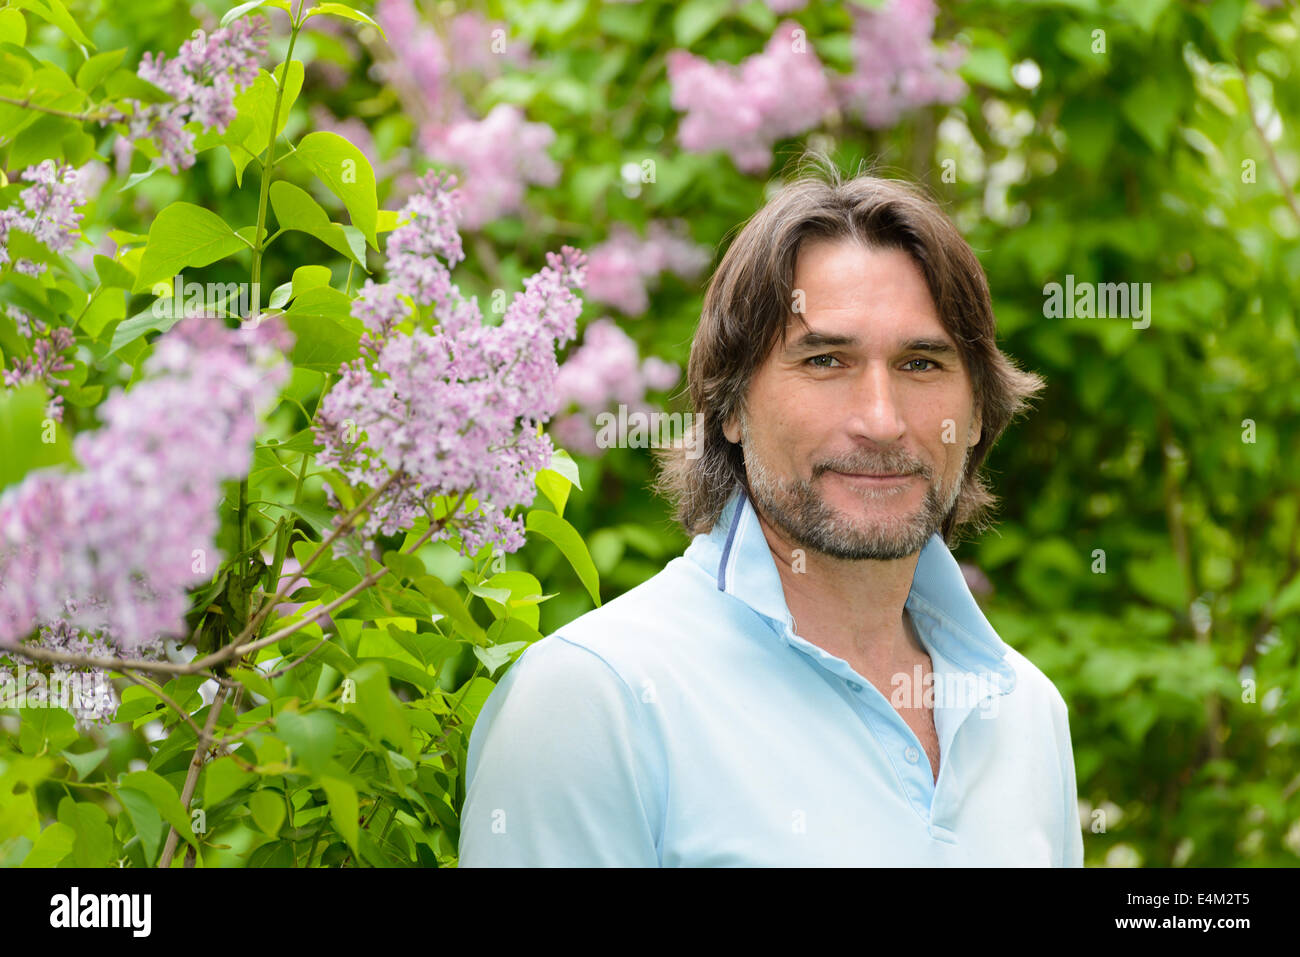 Middle-aged man near blooming lilacs Stock Photo